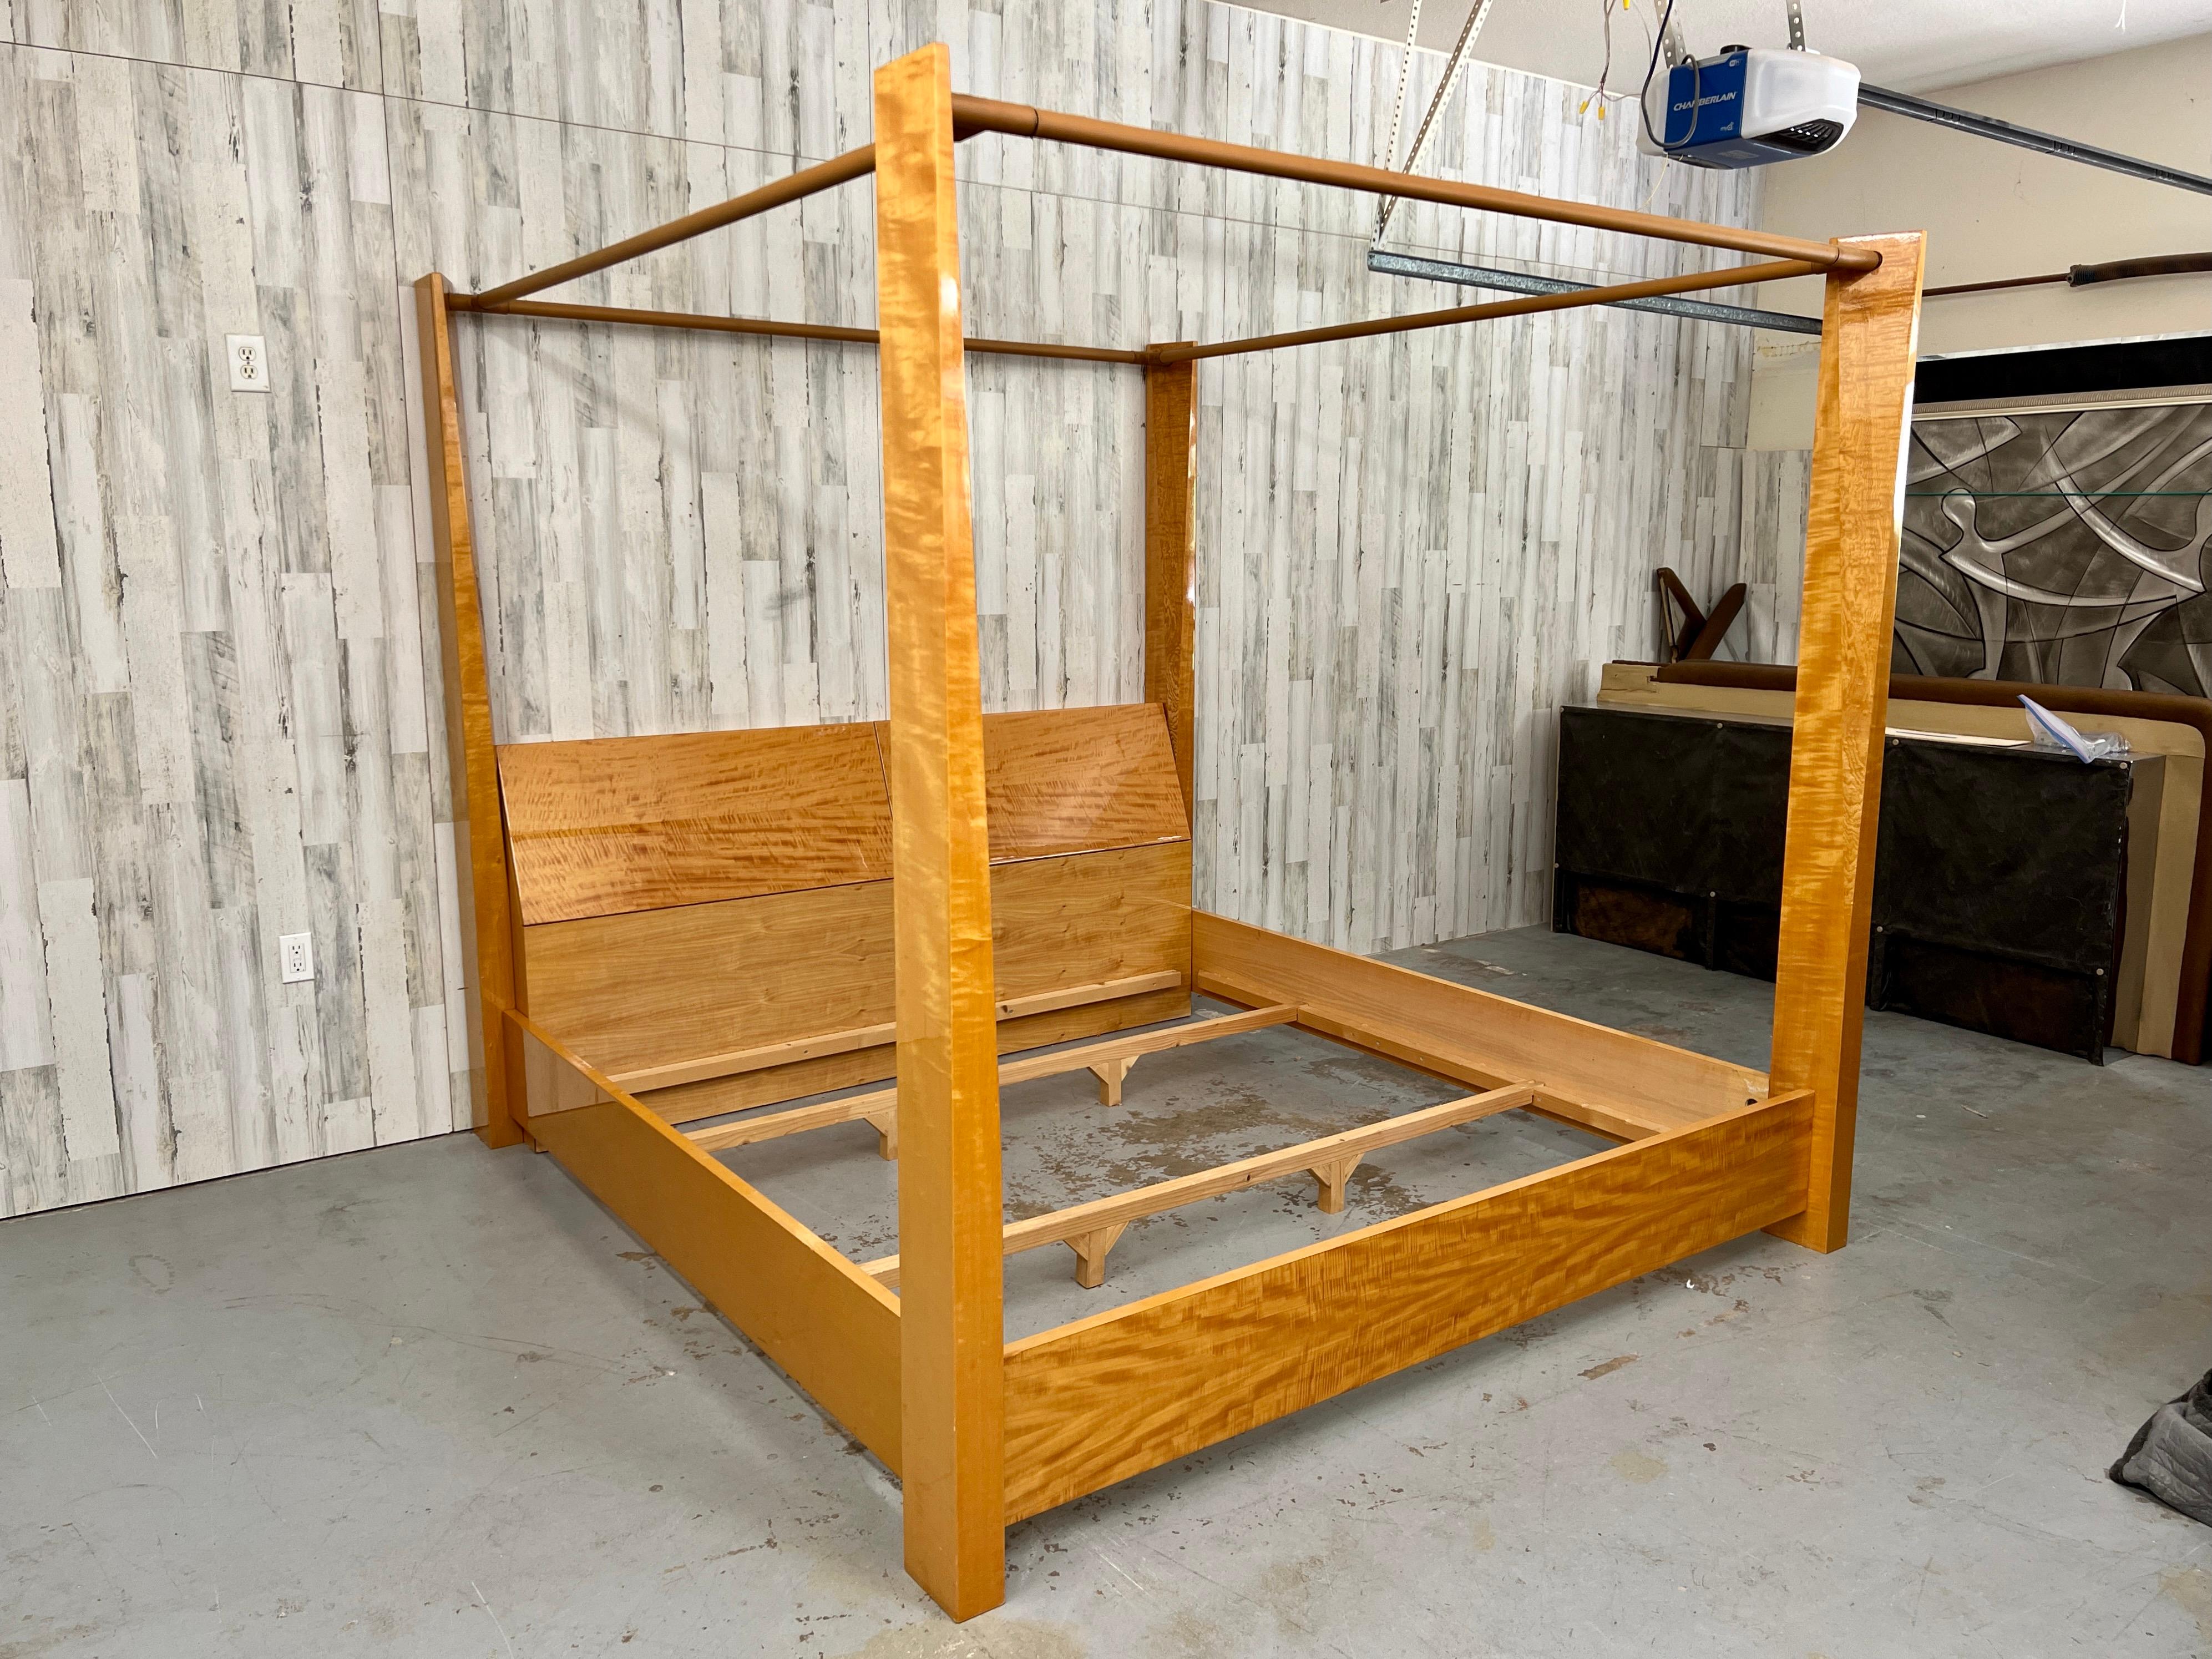 Giorgio Collection Exotic Satinwood & Leather wrapped Poster Bed. Luxurious satinwood base, headboard, and beveled posters. On top sits leather railing. Headboard has room for storage. This piece is incredible quality and very rare to find .  